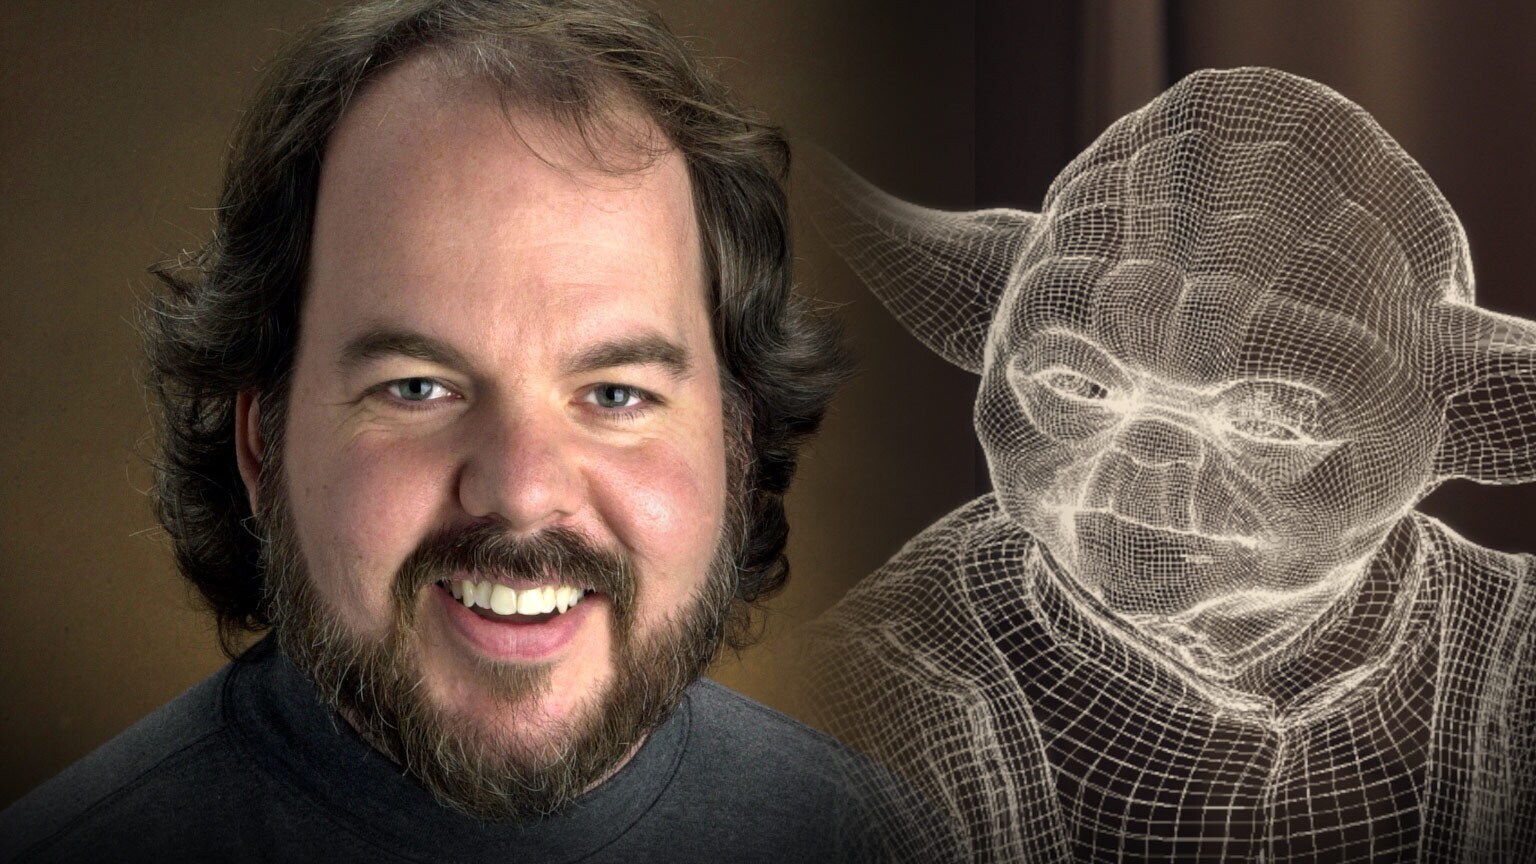 Clones at 20 | Rob Coleman on Bringing Yoda, Dexter Jettster, and More to Digital Life